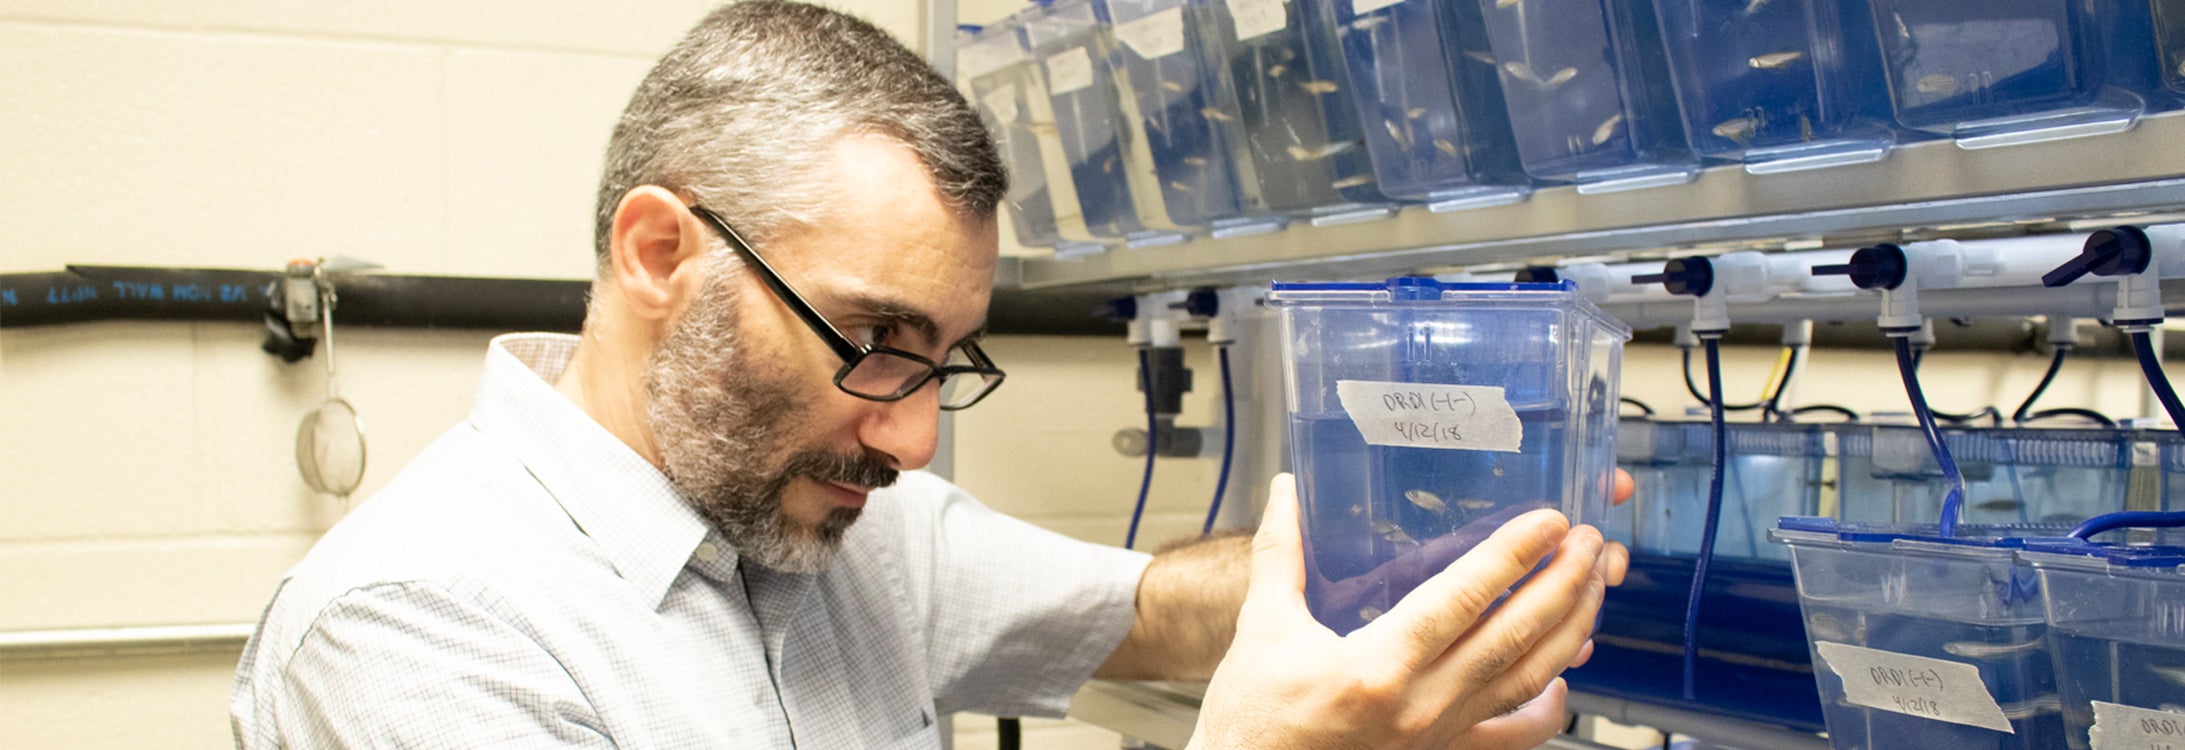 Assistant professor of neurobiology Fadi Issa examines a group of zebrafish in his lab. Issa is exploring the connection between social hierarchy in zebrafish and its effect on behavior and neurological systems to better understand human brain development.